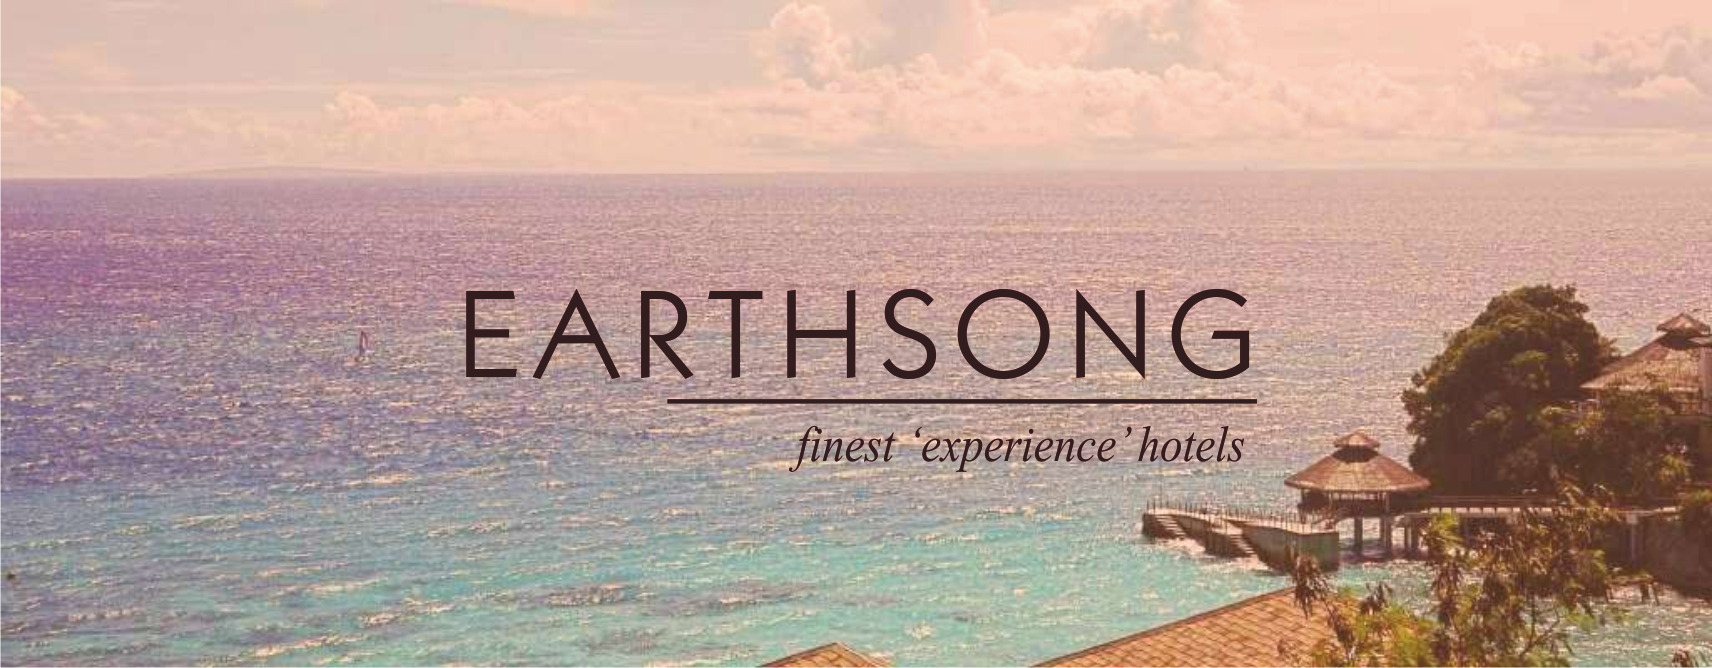 Earthsong Hotels - the finest 'experience' hotels